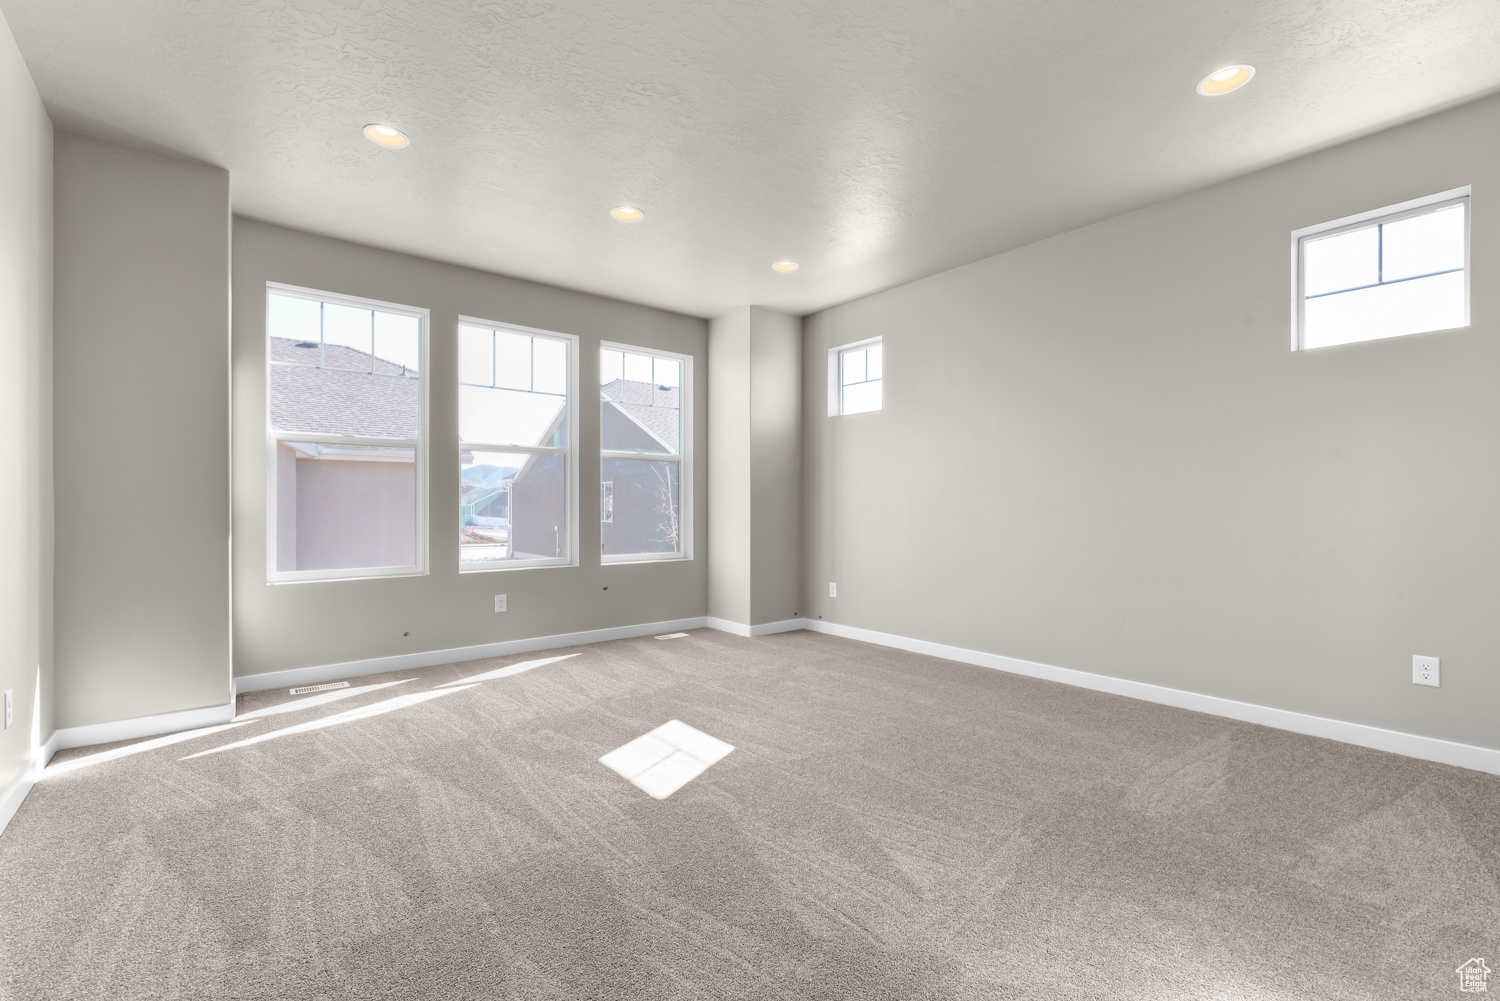 Unfurnished room featuring plenty of natural light and carpet flooring